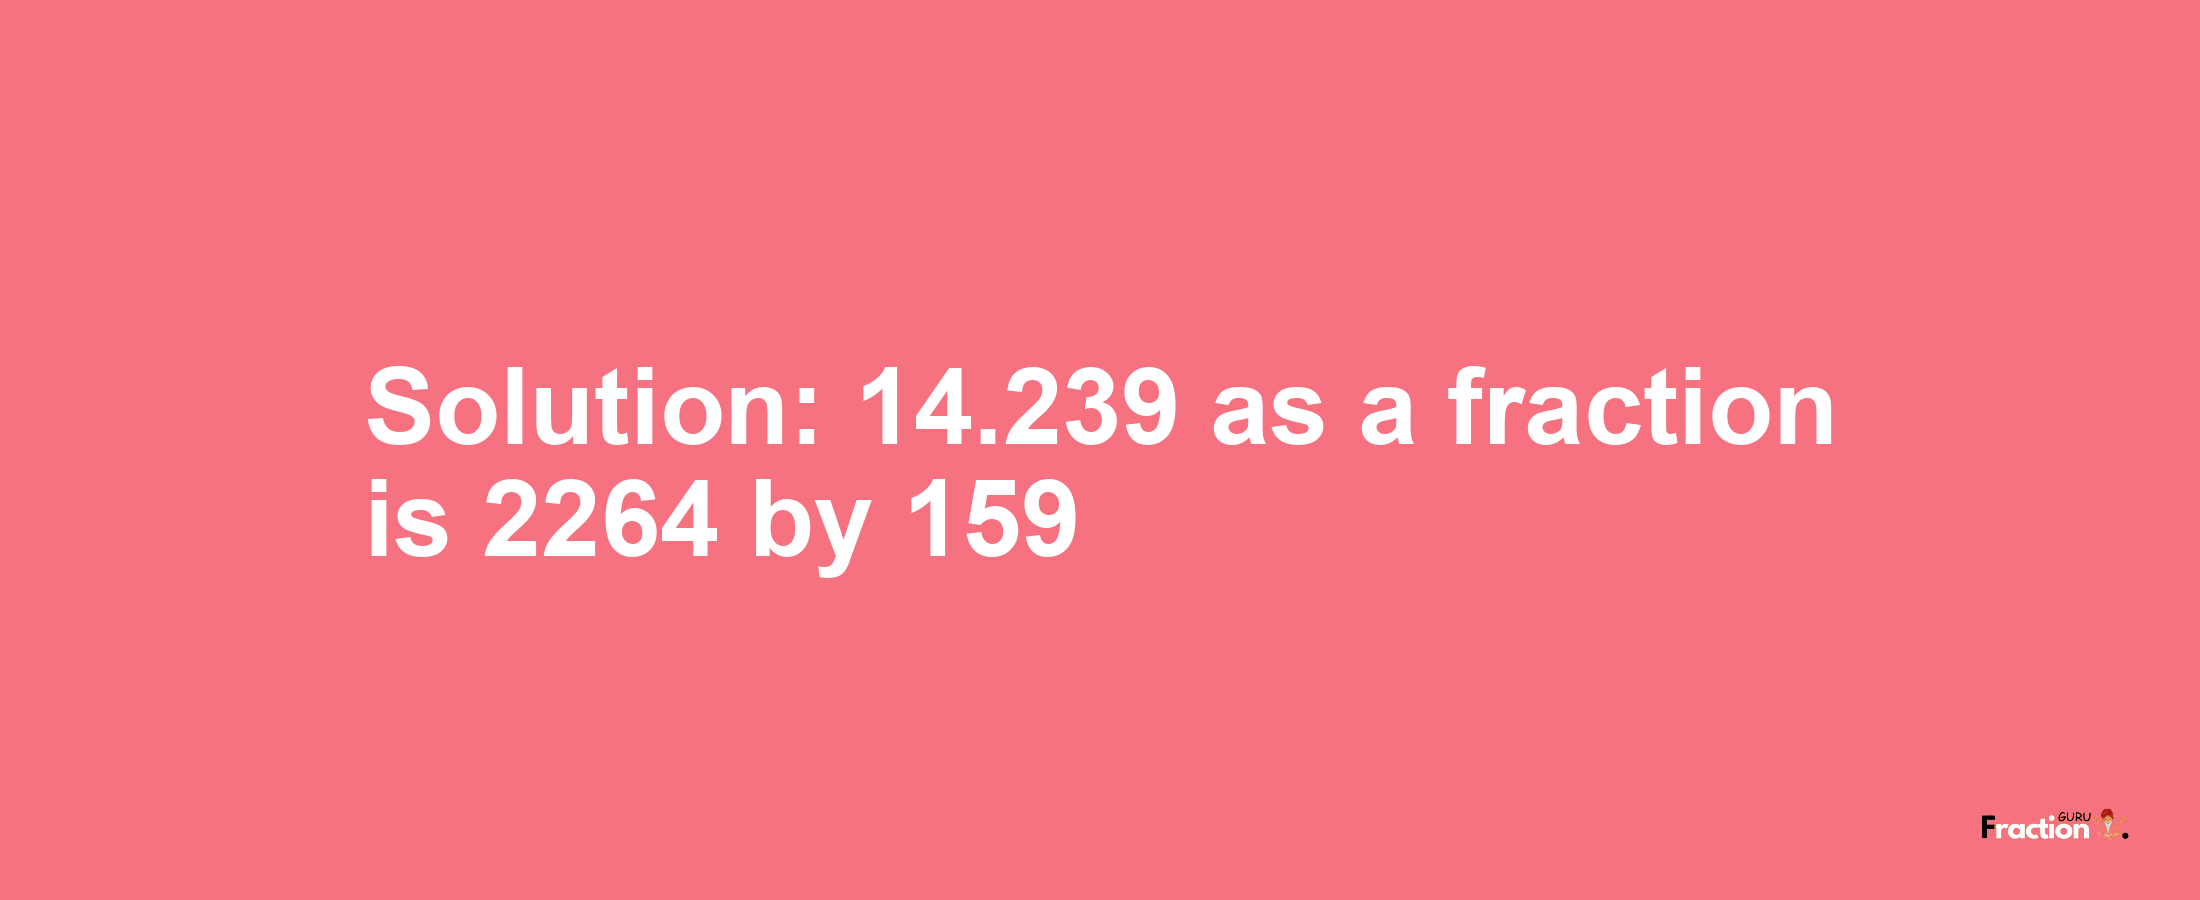 Solution:14.239 as a fraction is 2264/159